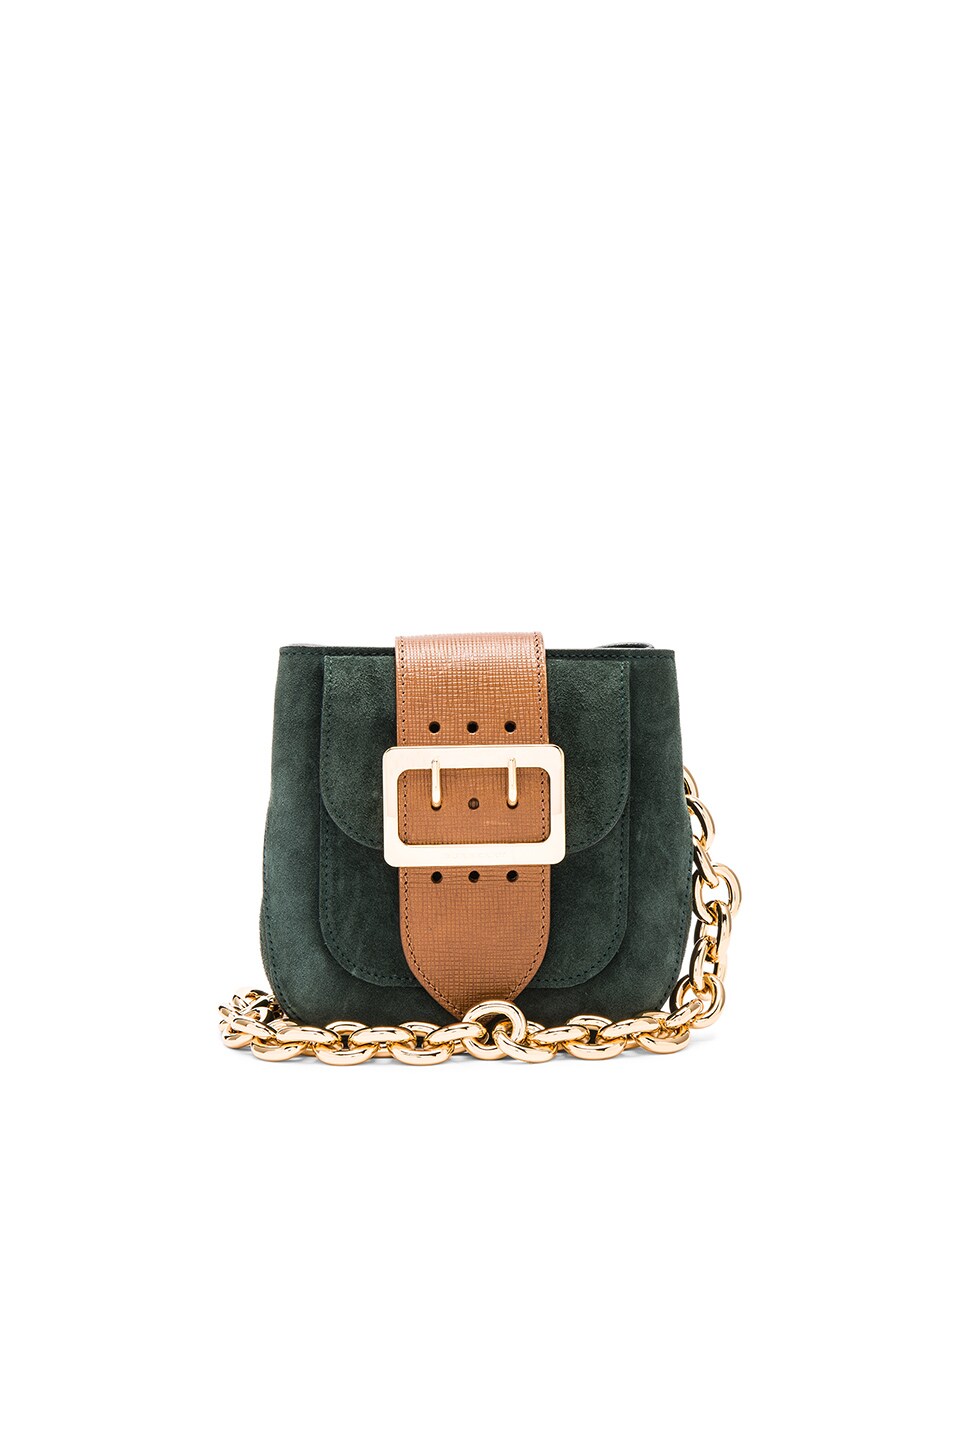 Image 1 of Burberry Prorsum Small Suede Belt Bag in Dark Forest Green